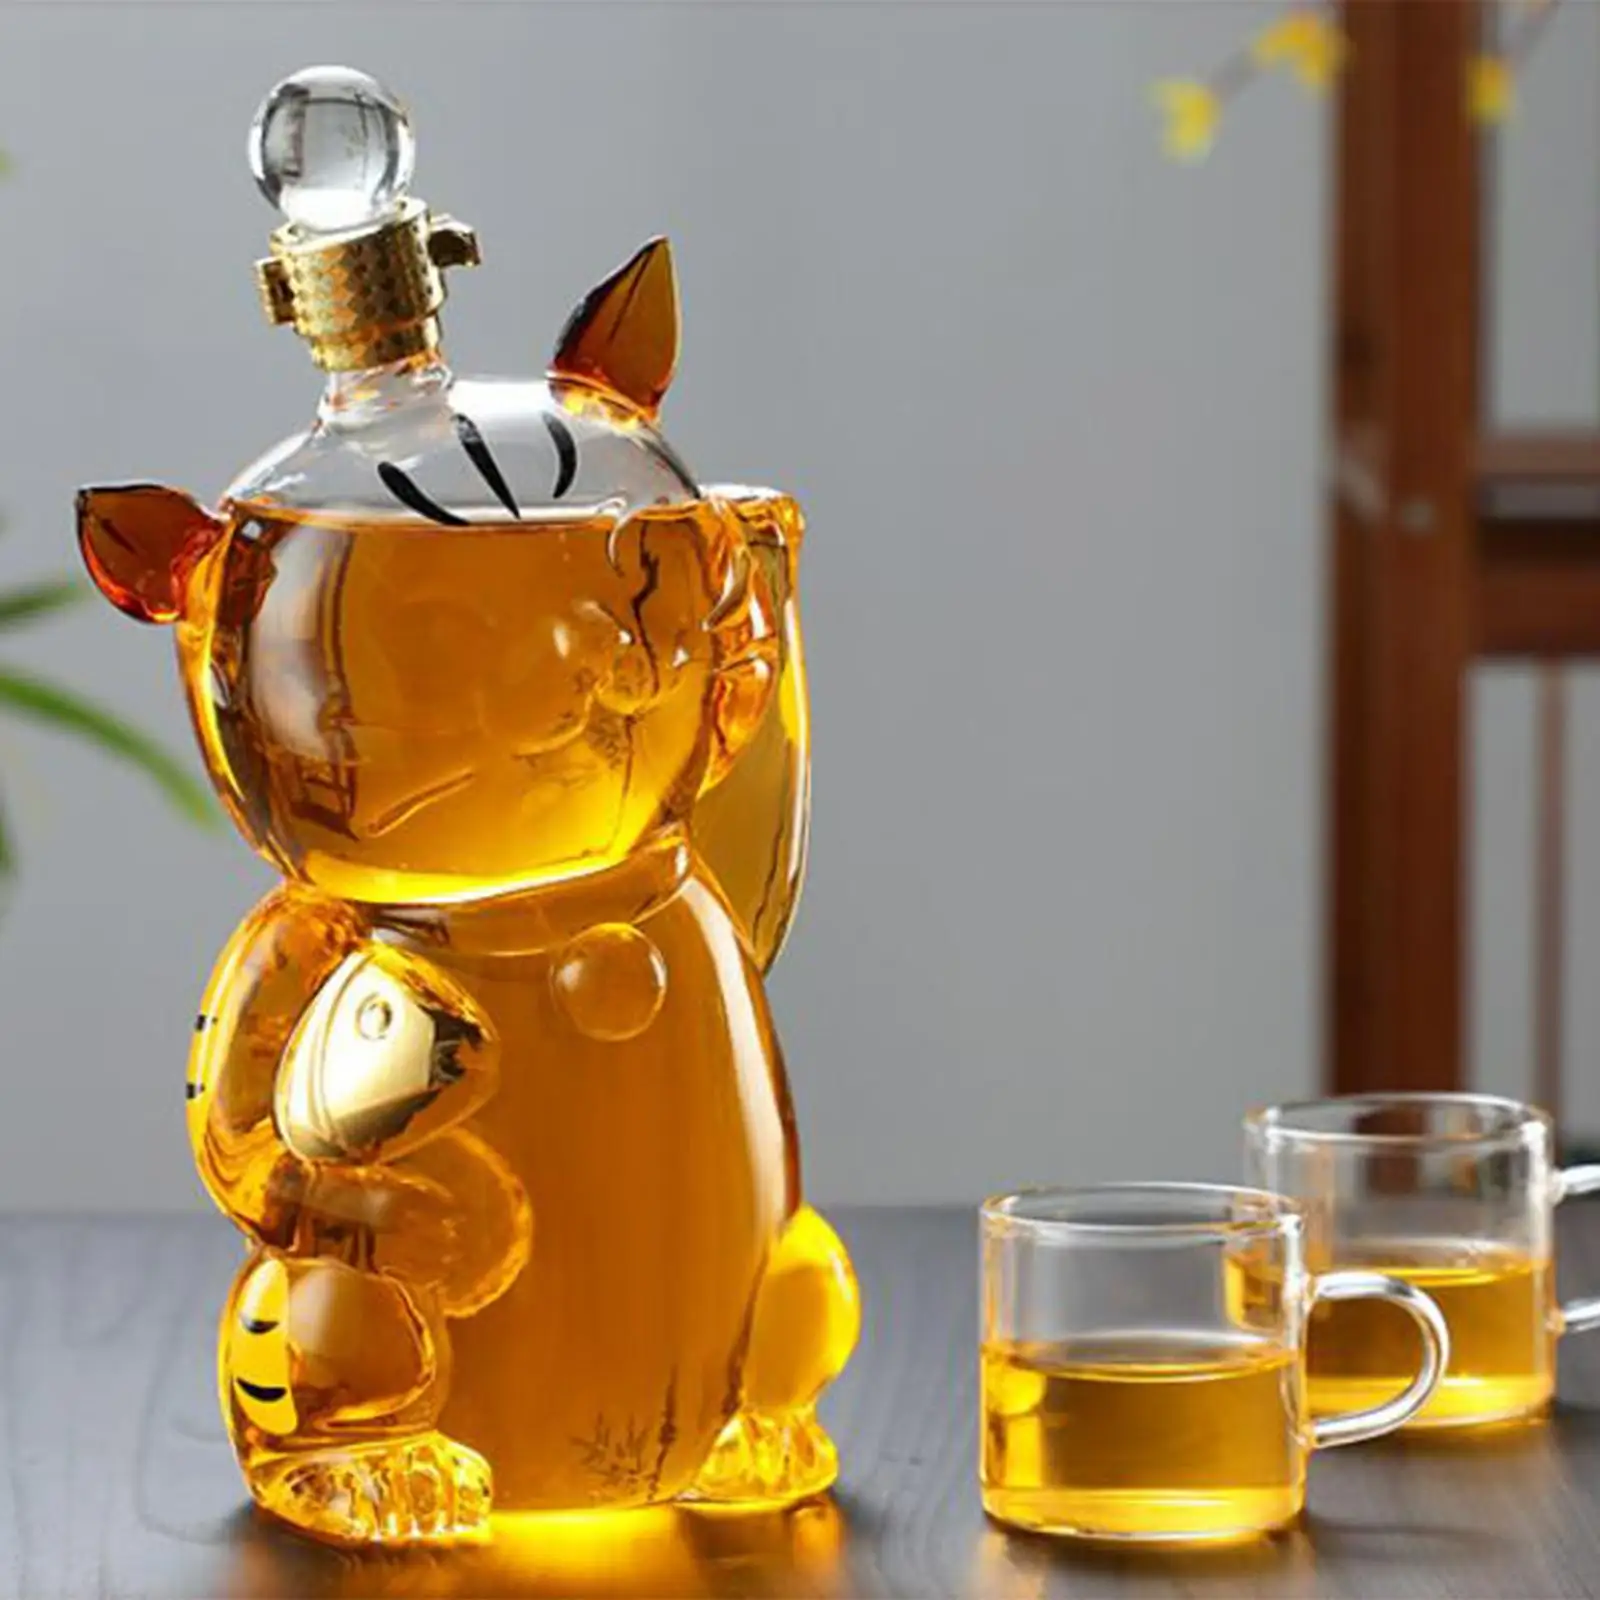 Cat Shaped Glass Decanter with Stopper Dispenser 1000ml for Party Home